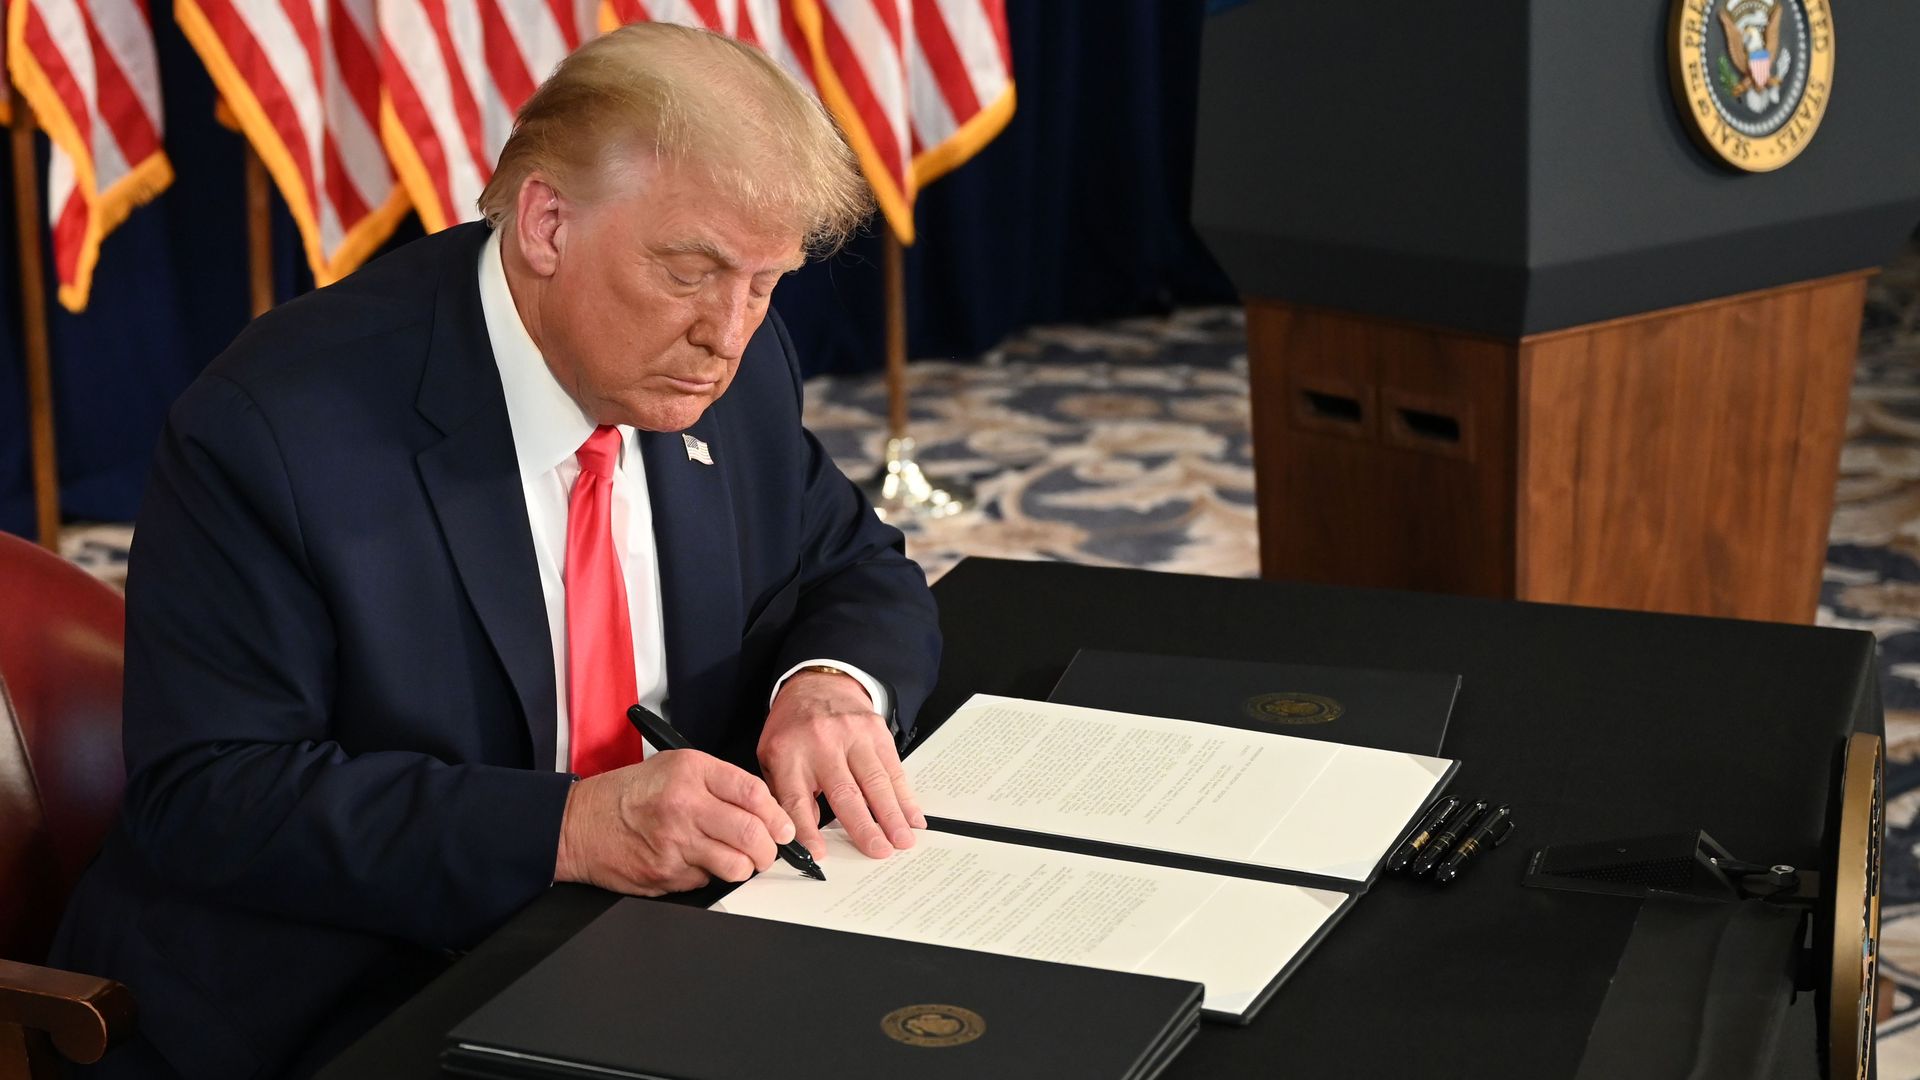 Trump signing executive orders Aug. 8